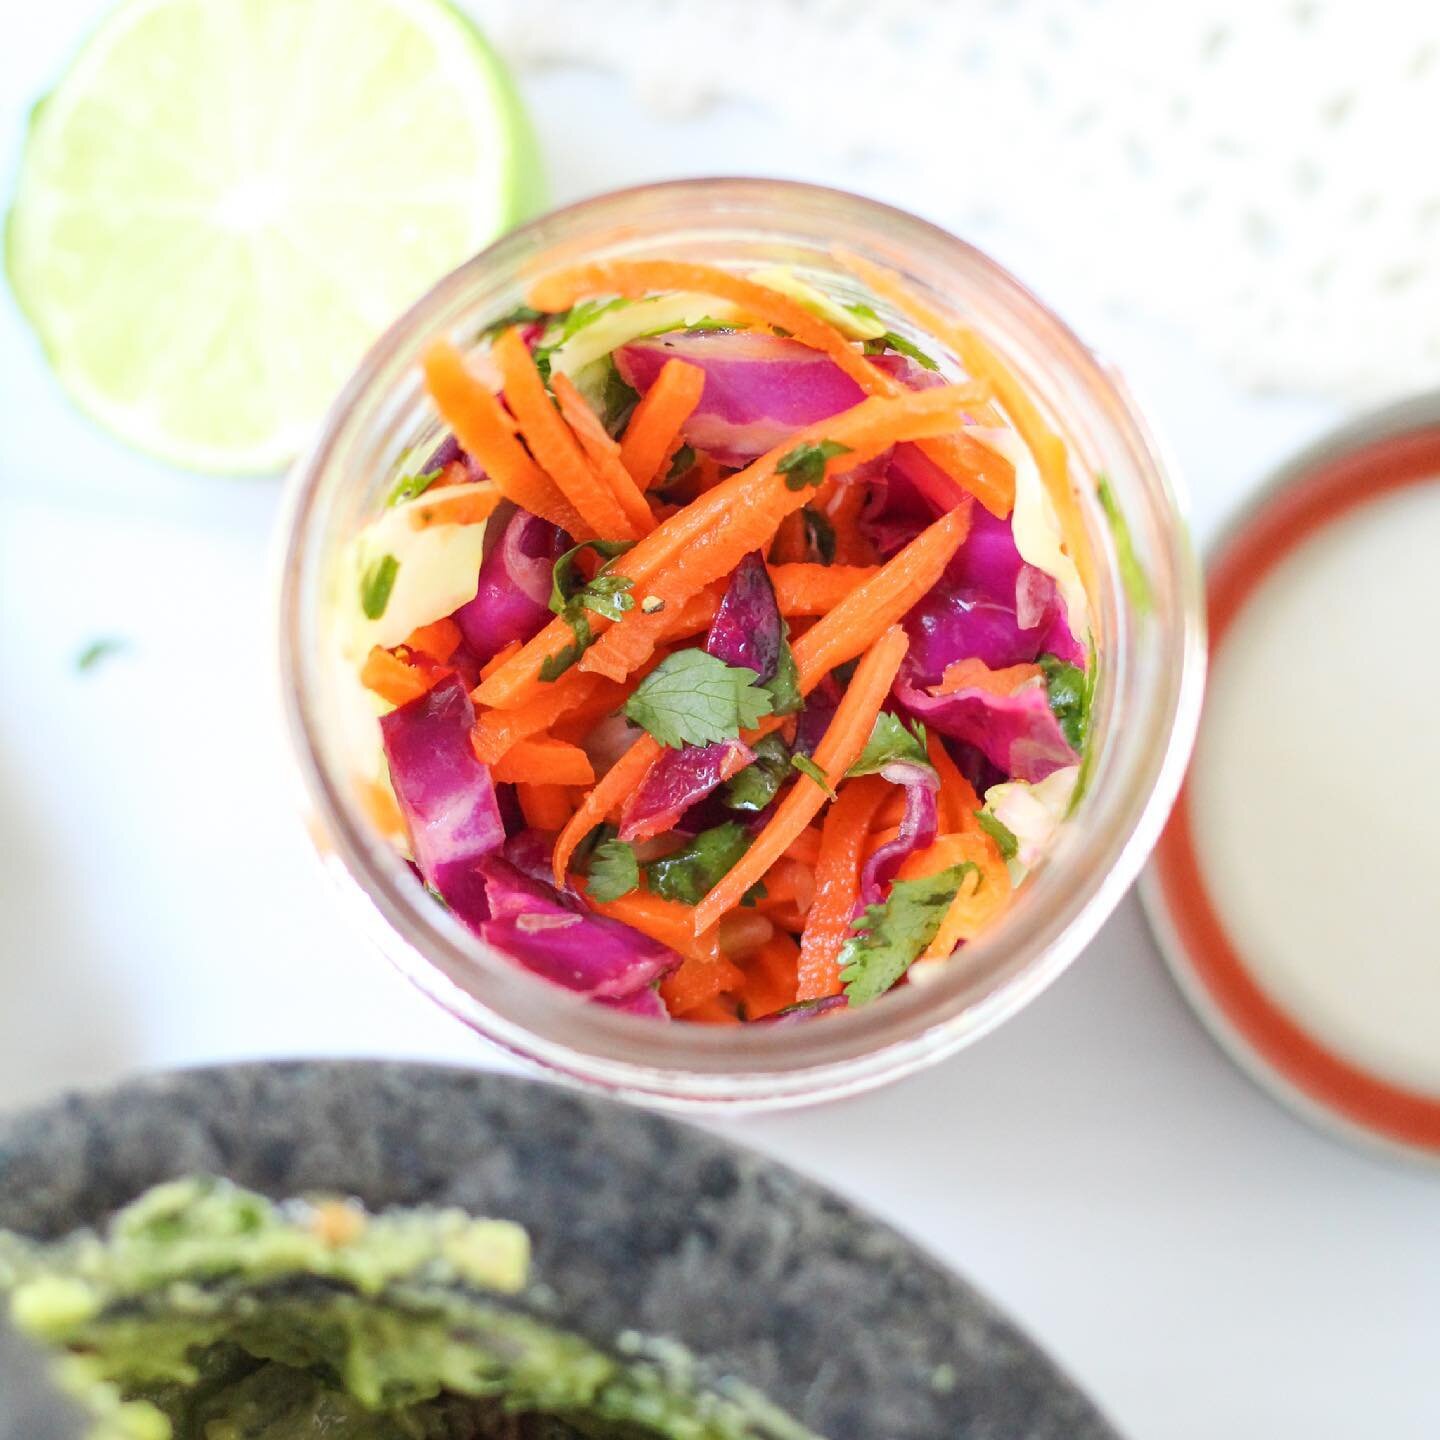 Taco Tuesday is my favorite day of the week! Let&rsquo;s celebrate by making this Lime Cilantro Slaw that you can add to any taco dish to jazz it up 🌮! 

LIME CILANTRO SLAW:
- 1/2 cup purple cabbage sliced thinly
- 1/2 cup green cabbage sliced thinl